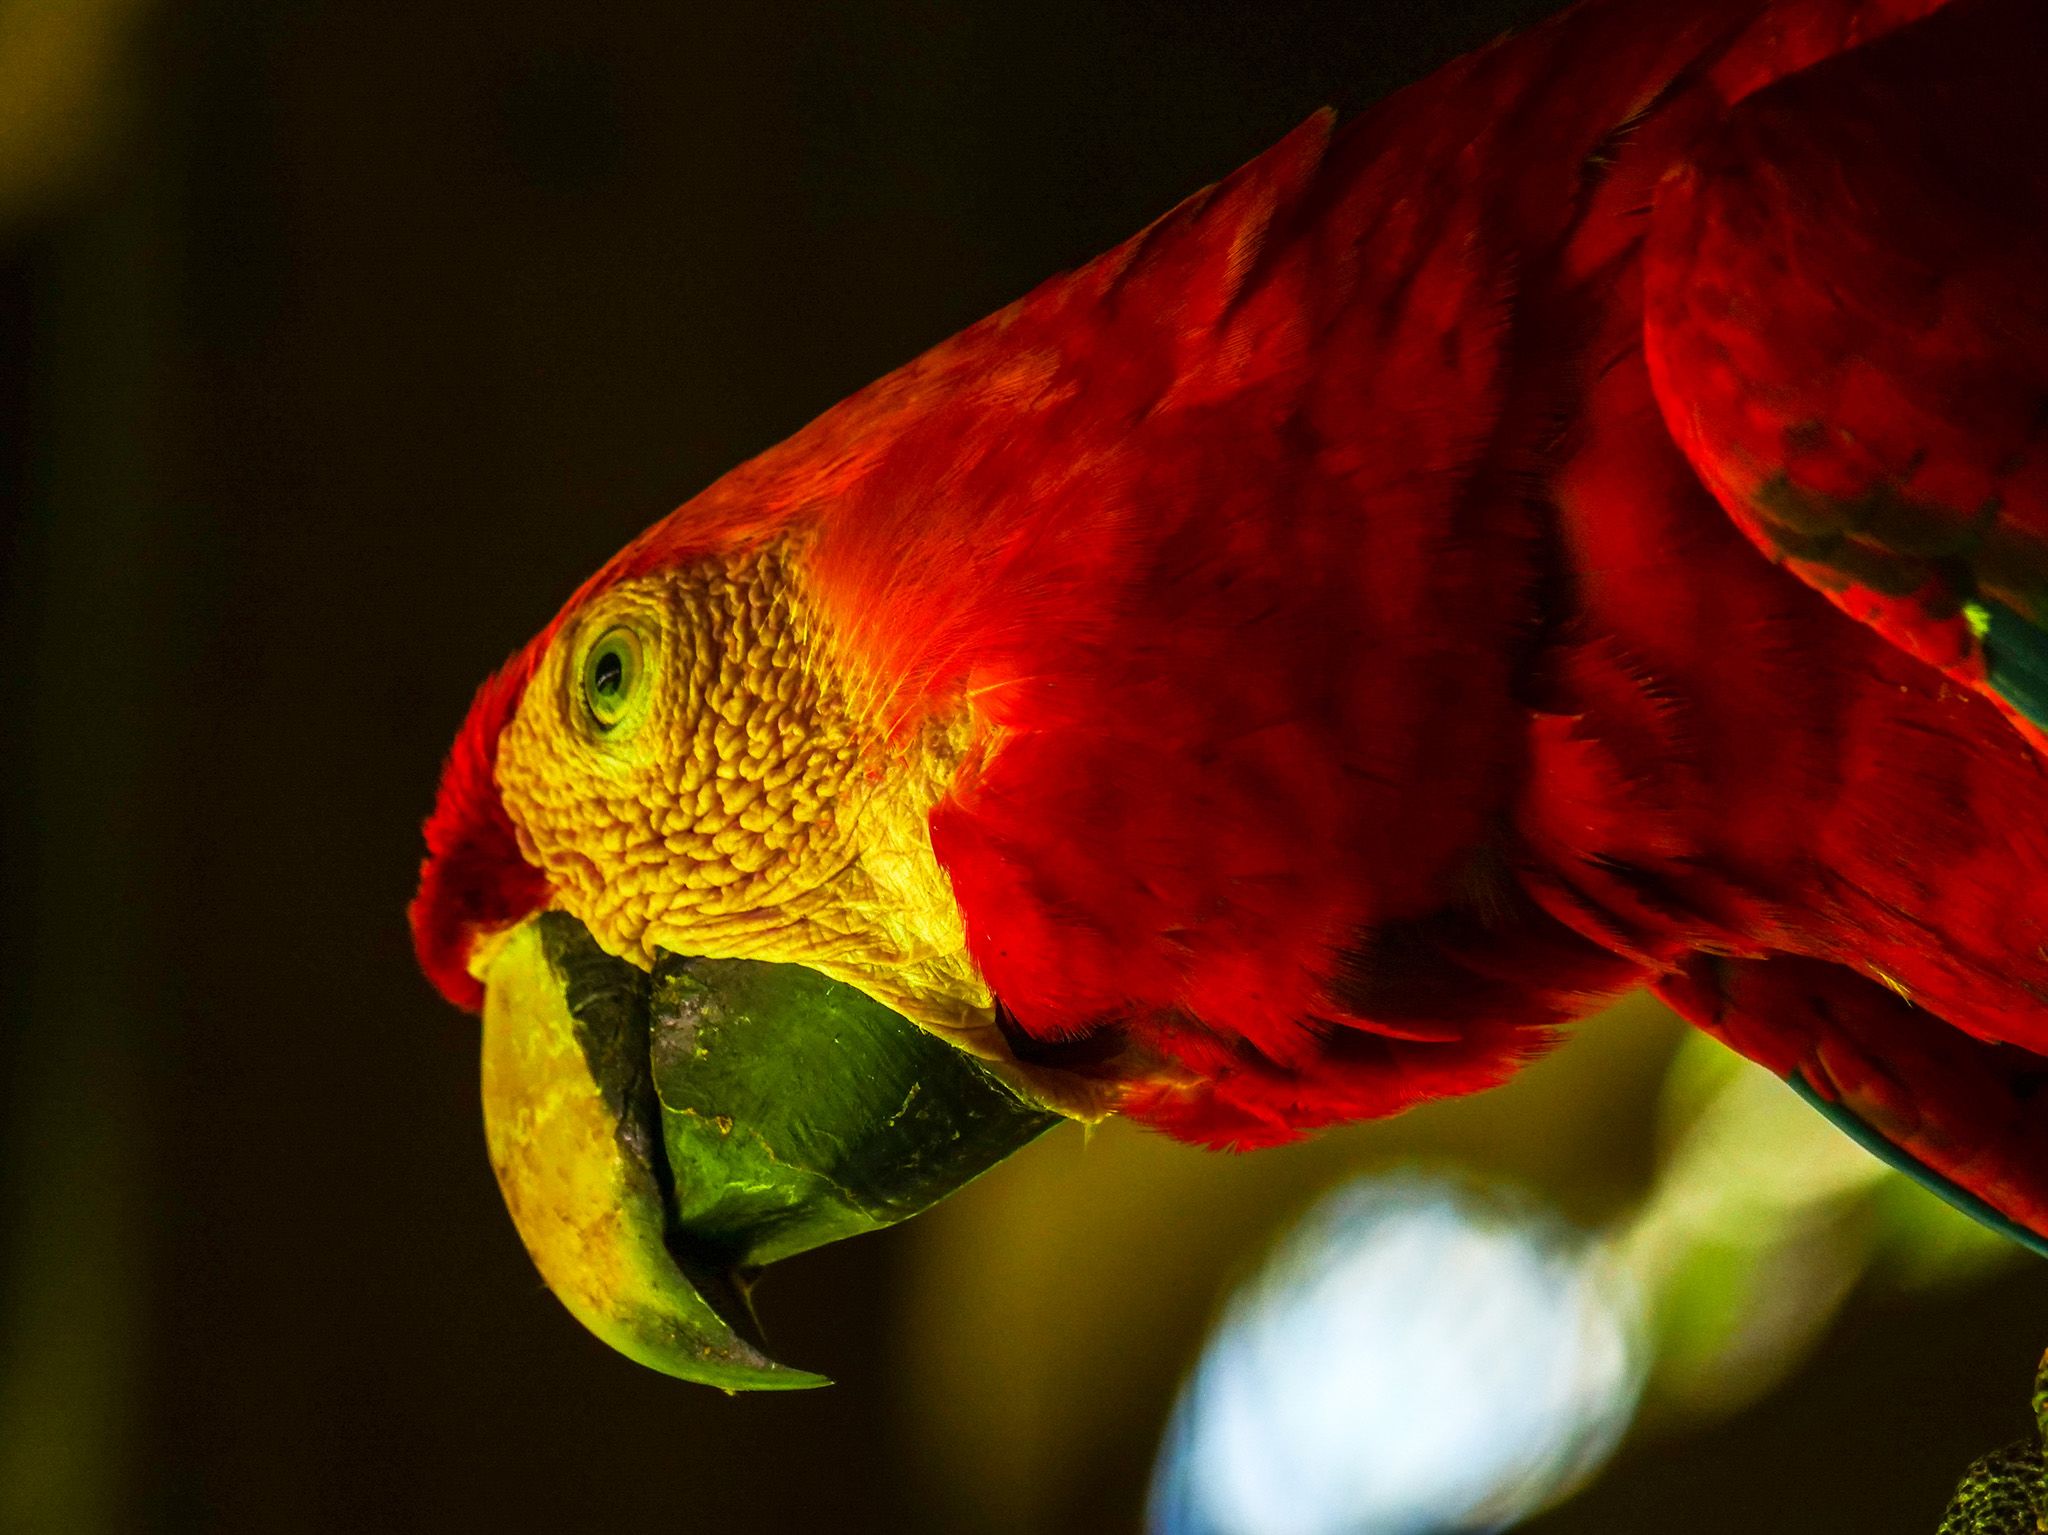 A Red and Green Macaw. This image is from Wild Peru: Andes Battleground. [Photo of the day - October 2020]